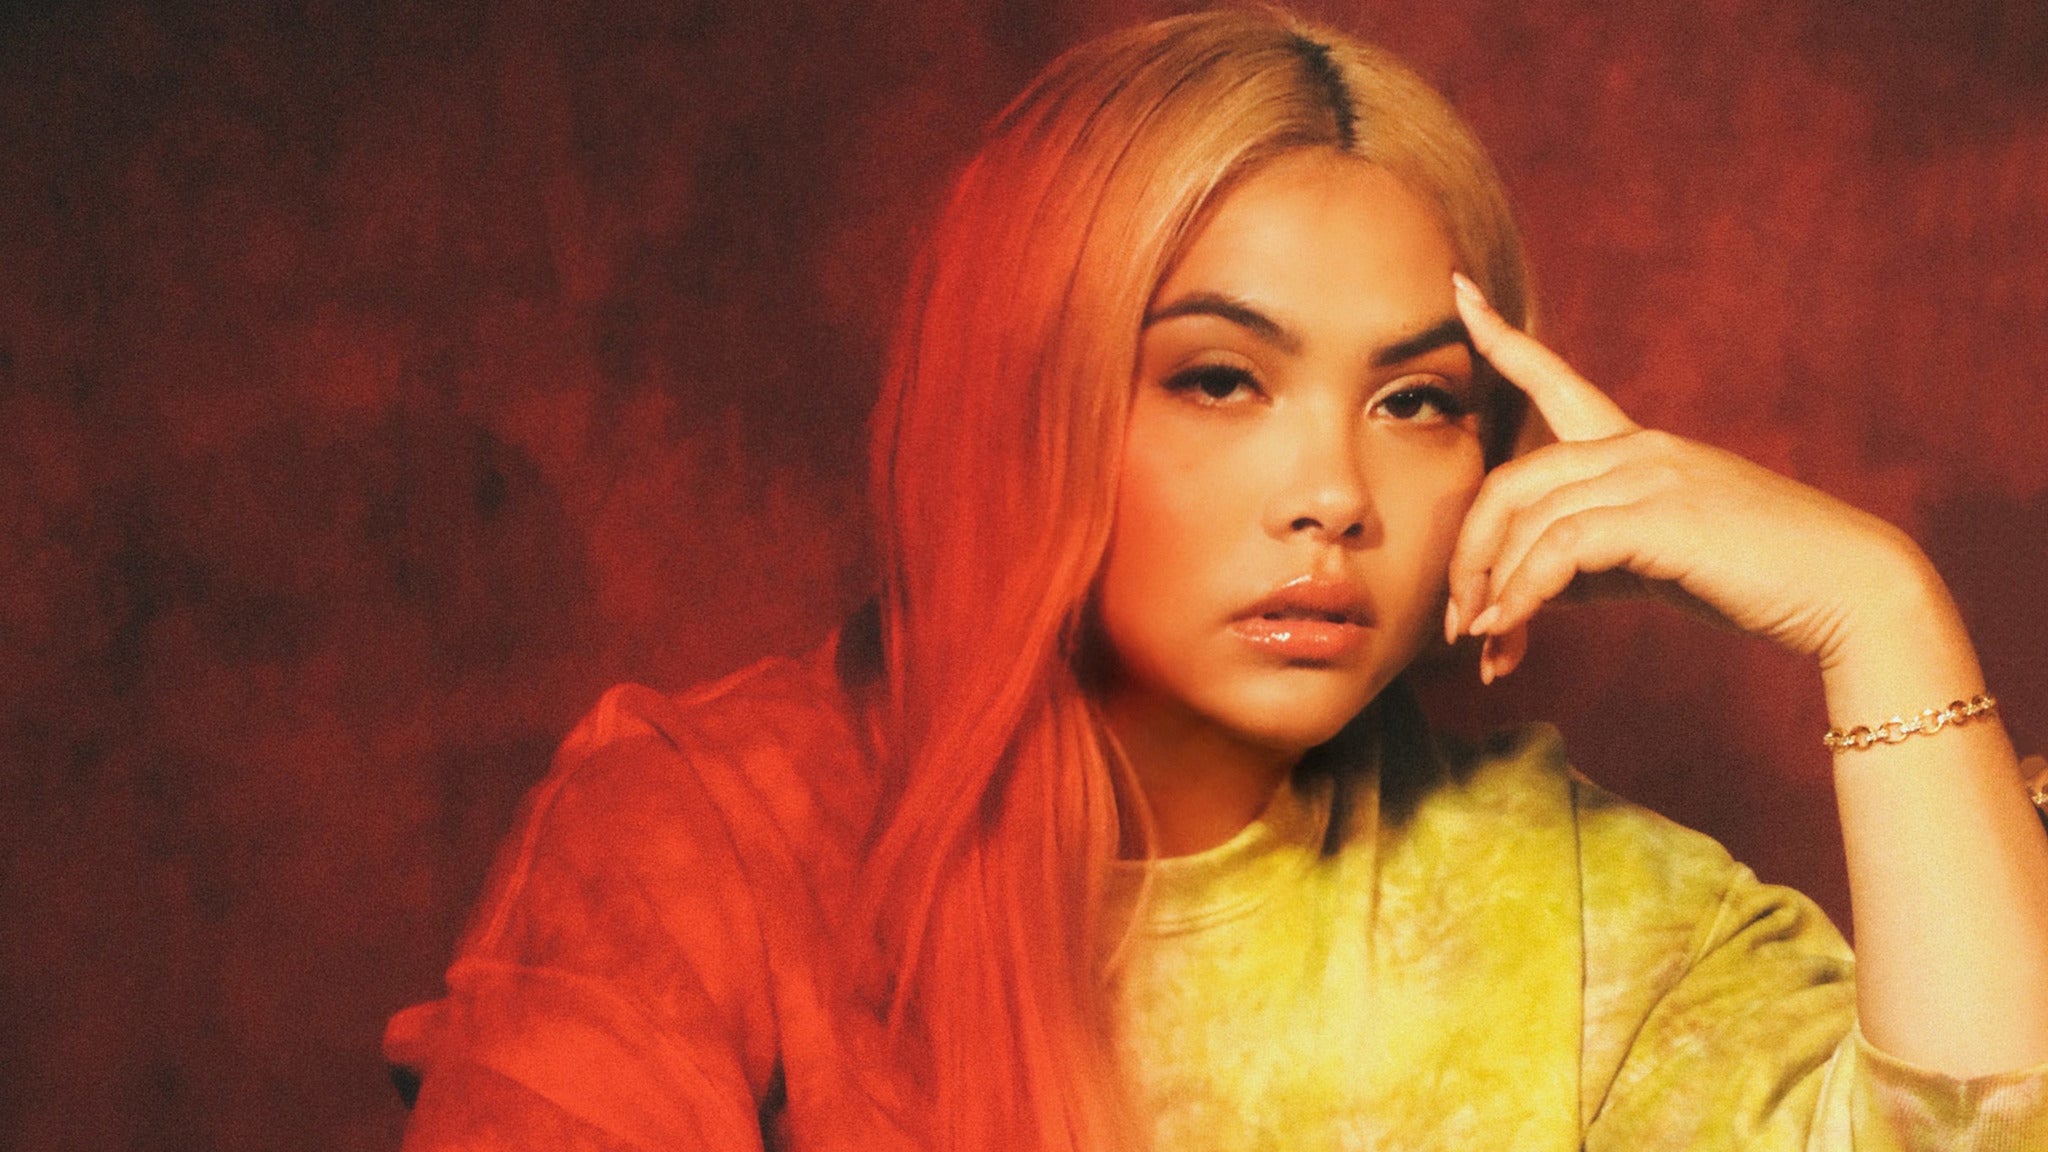 Hayley Kiyoko - Expectations North American Tour in Boston promo photo for Live Nation Mobile App presale offer code